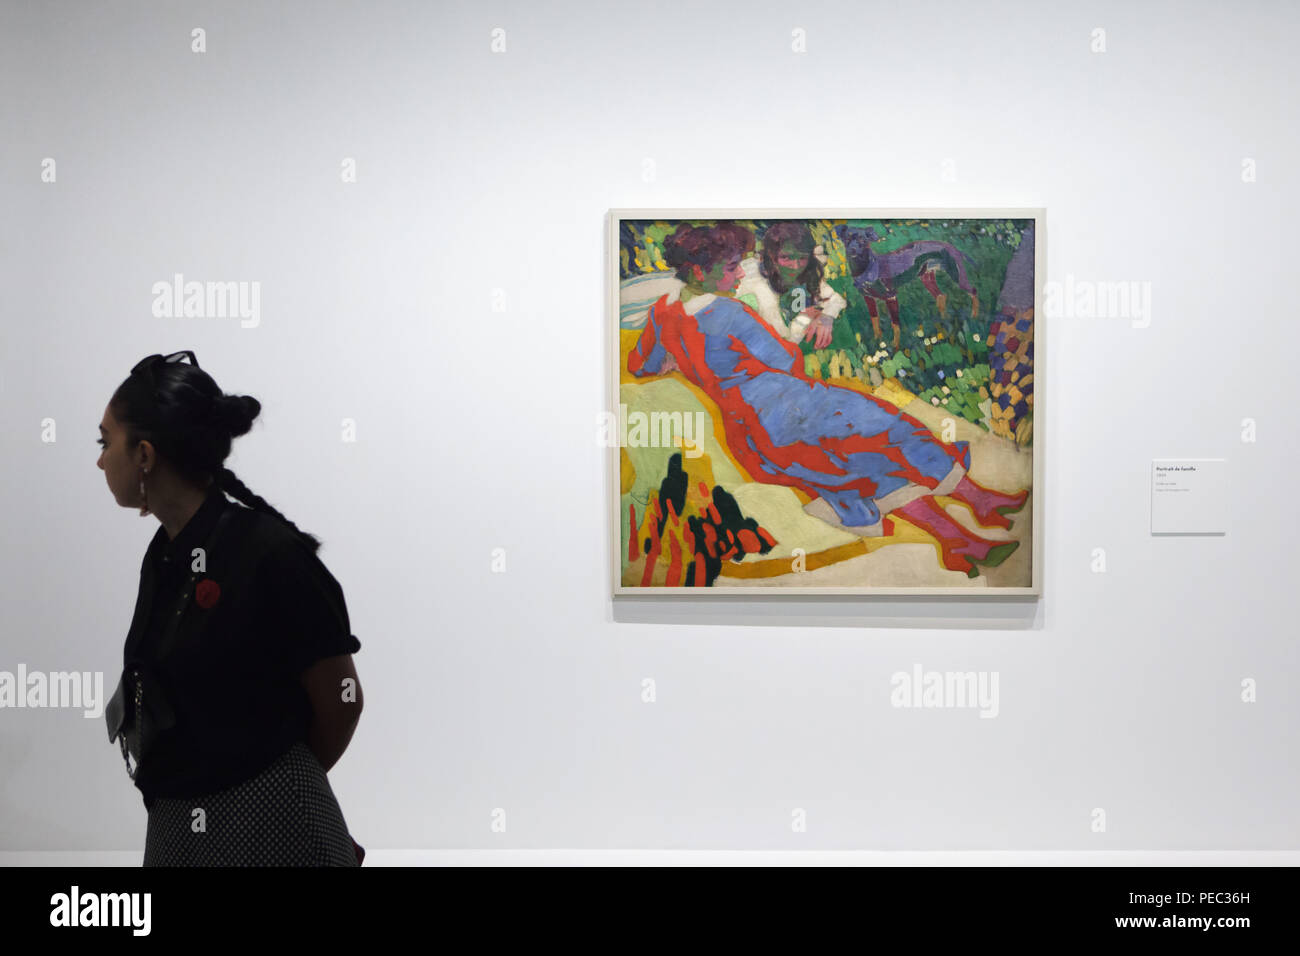 Visitor in front of the painting 'Family Portrait' by Czech modernist painter František Kupka (1910) displayed at his retrospective exhibition in the Grand Palais in Paris, France. The exhibition runs till 30 July 2018. Stock Photo